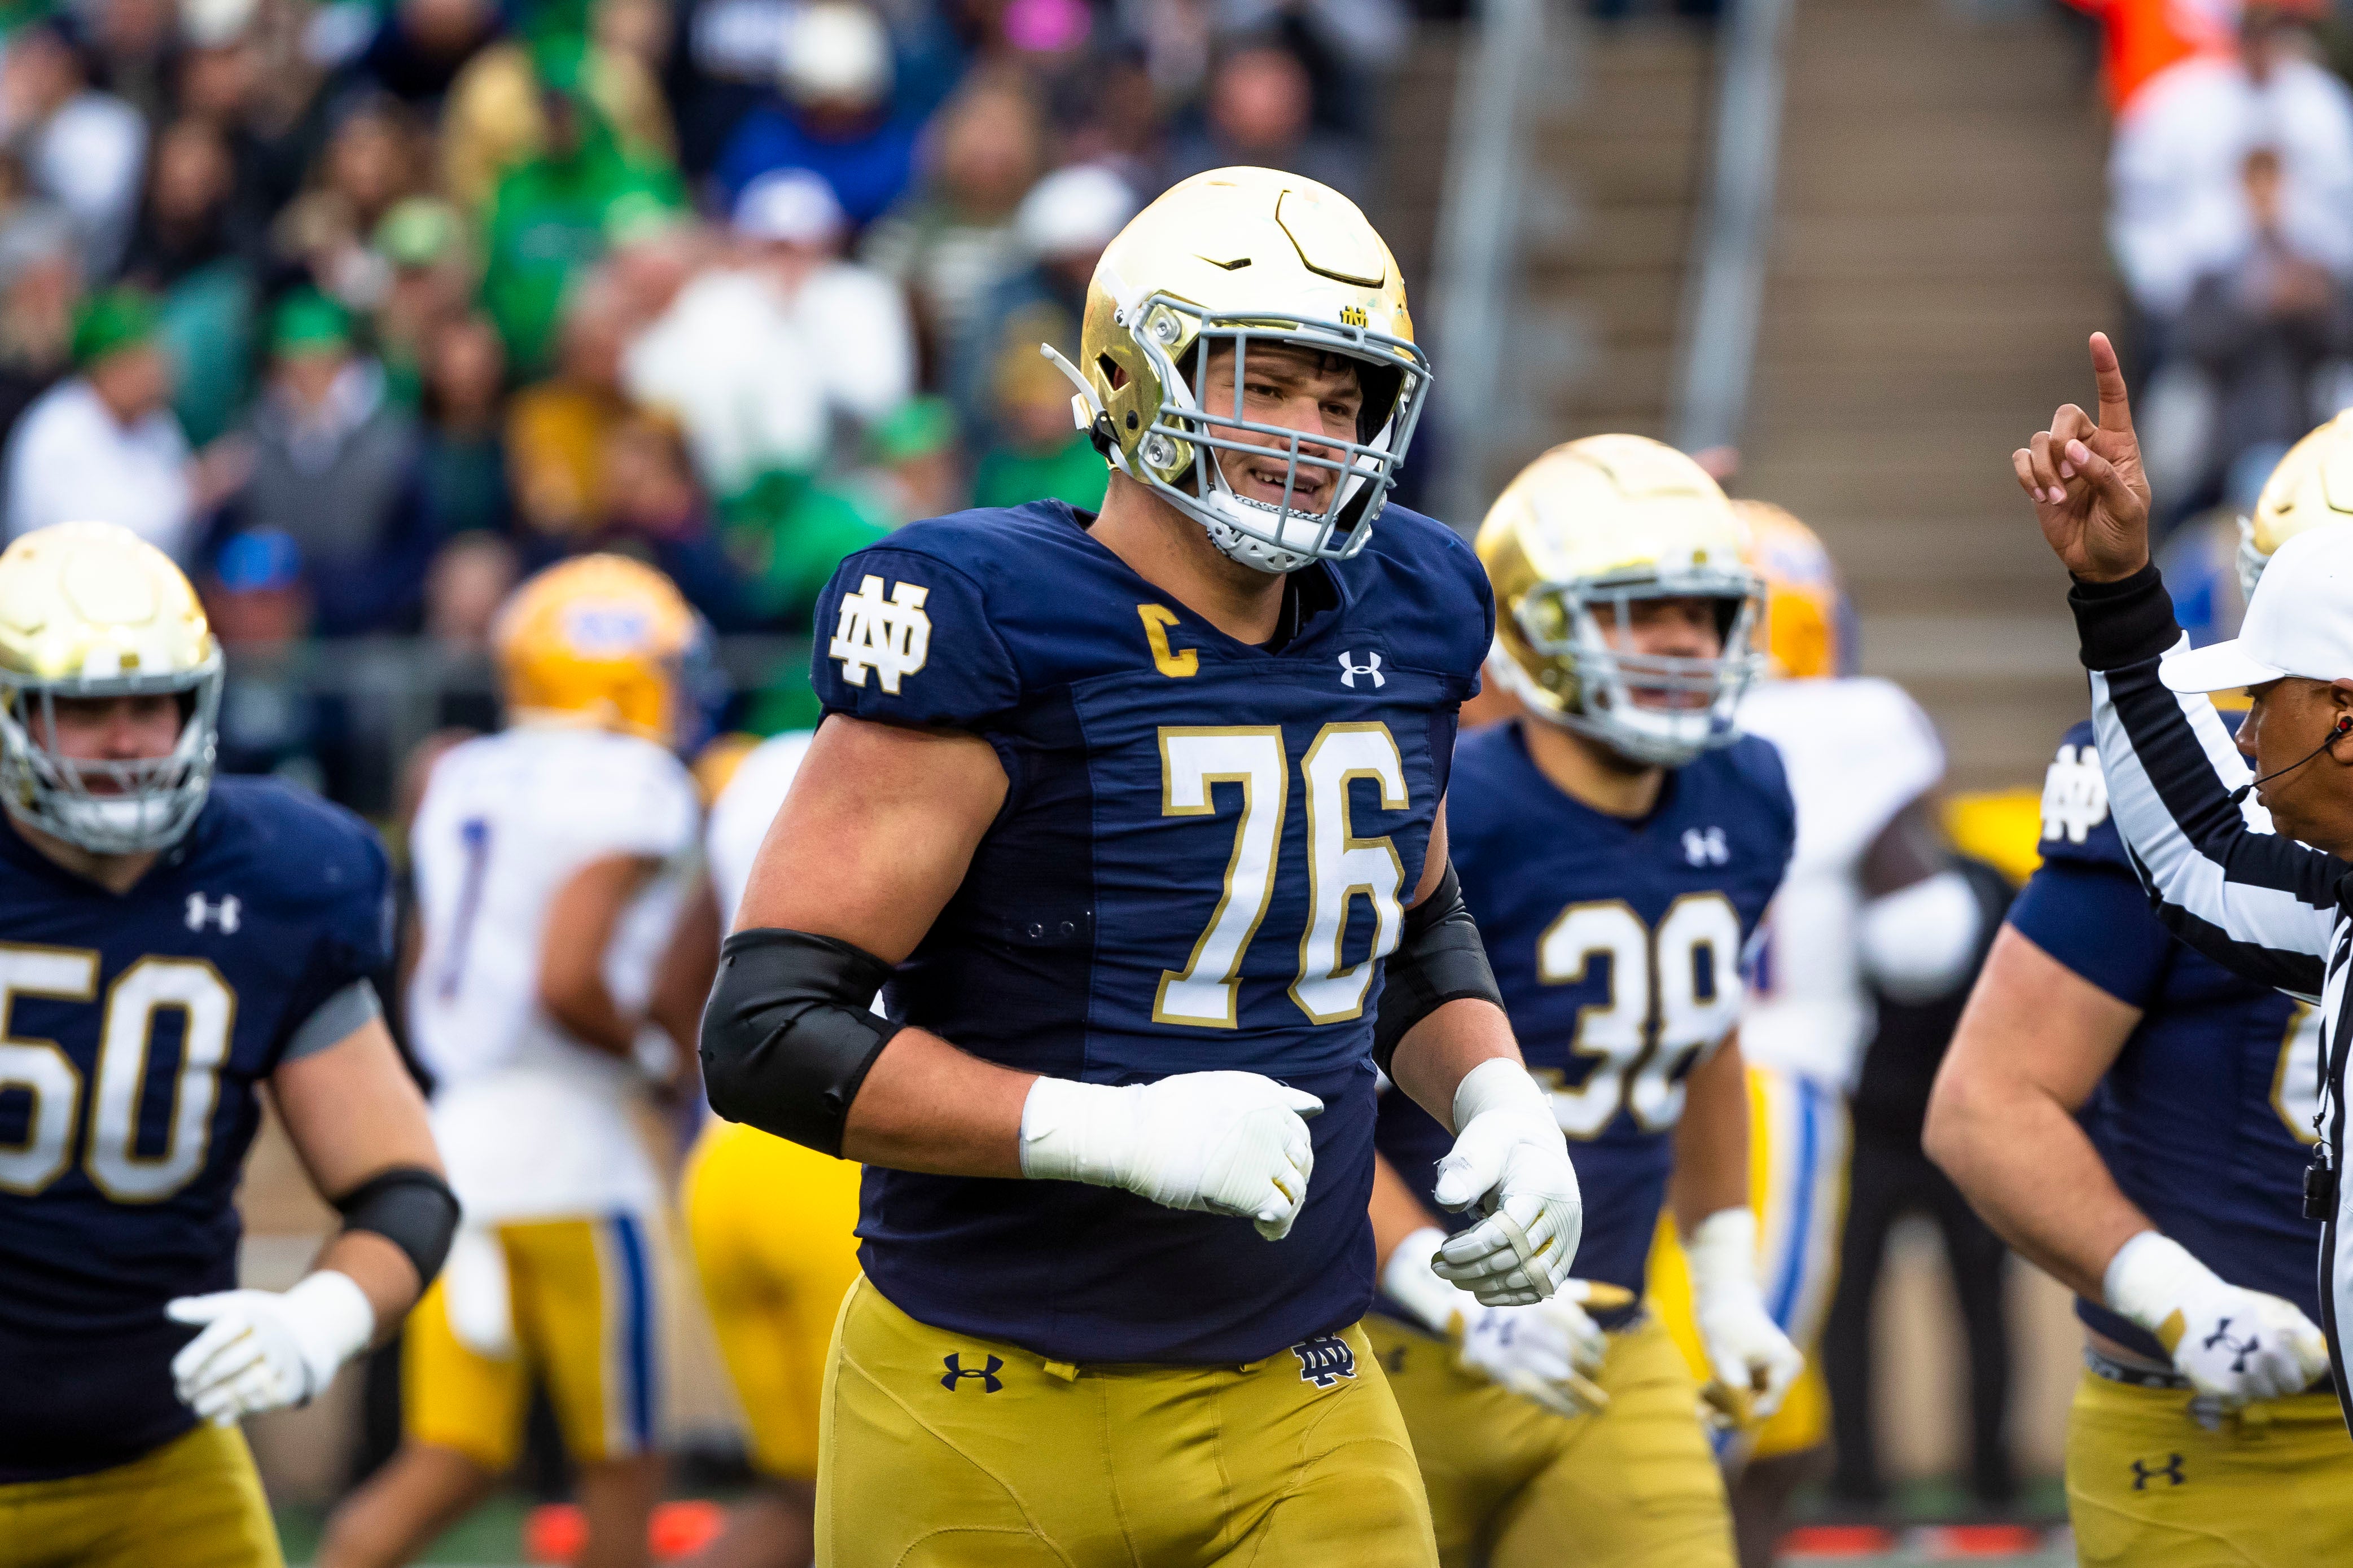 Joe Alt could be the first offensive lineman to be drafted this week